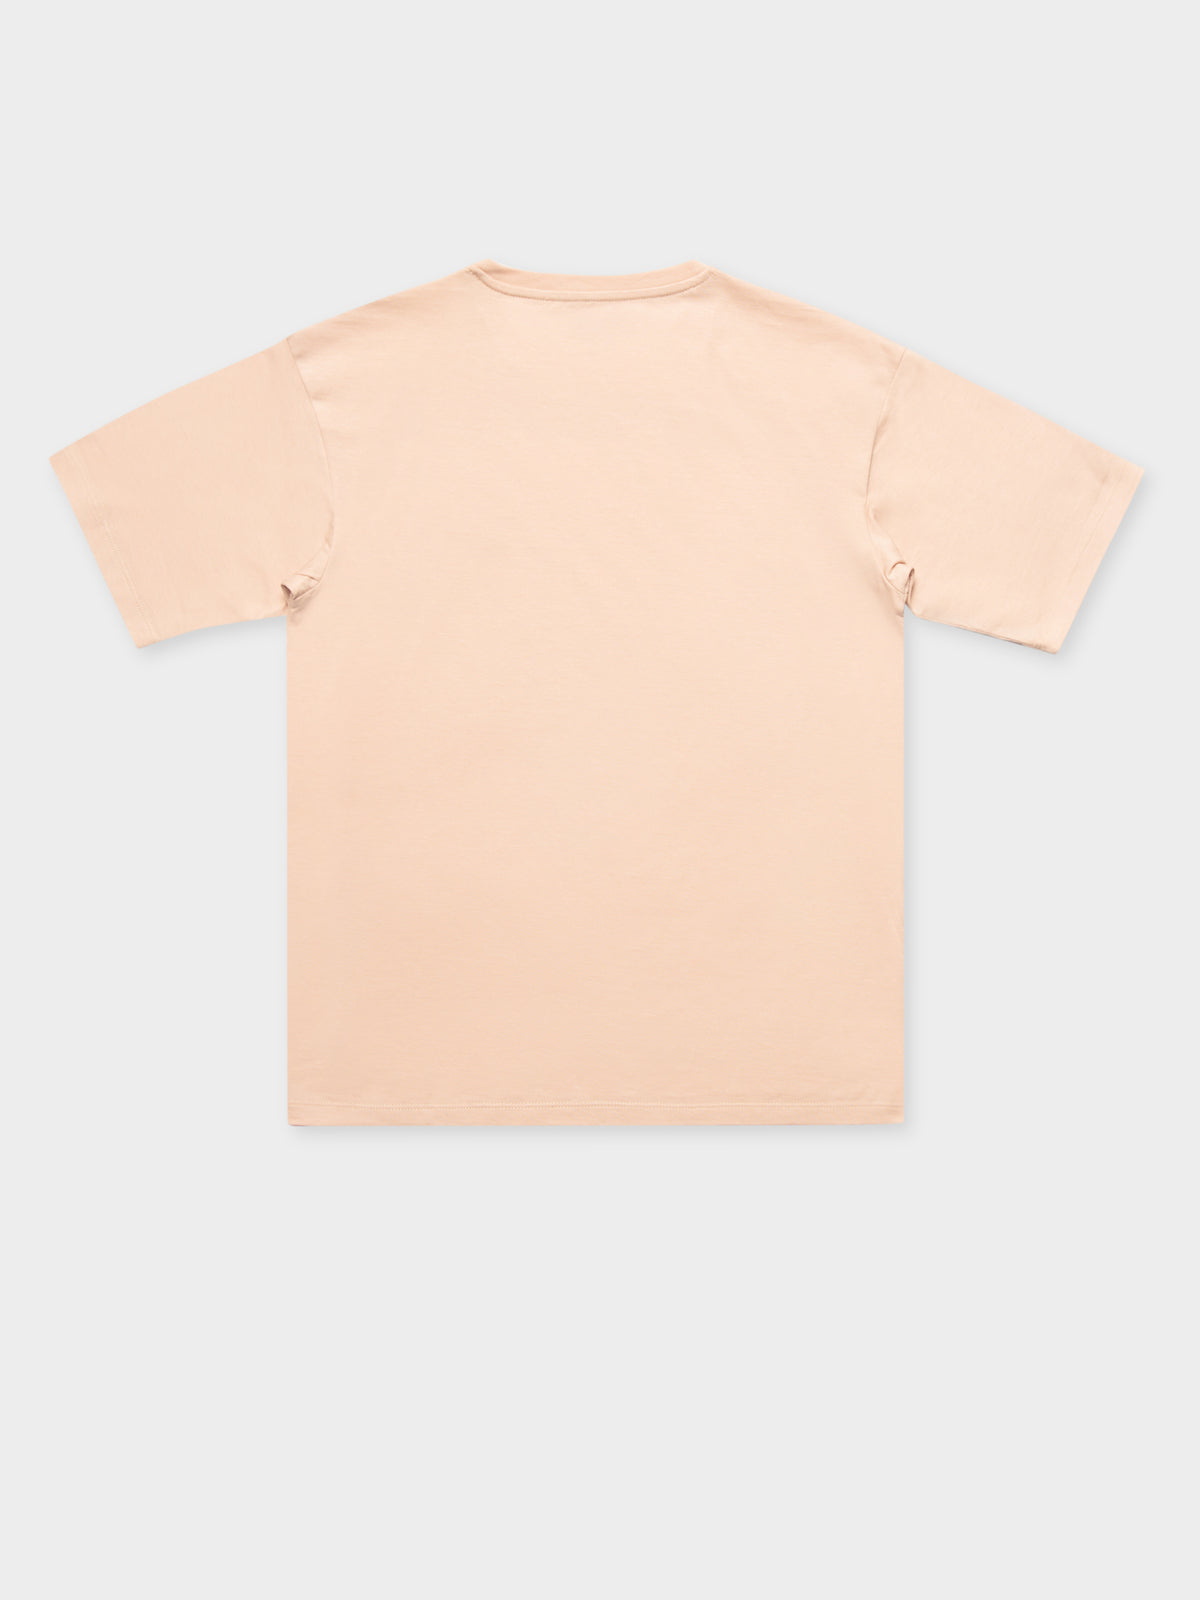 Short Sleeve Chasey T-Shirt in Powdery Pink &amp; Gold